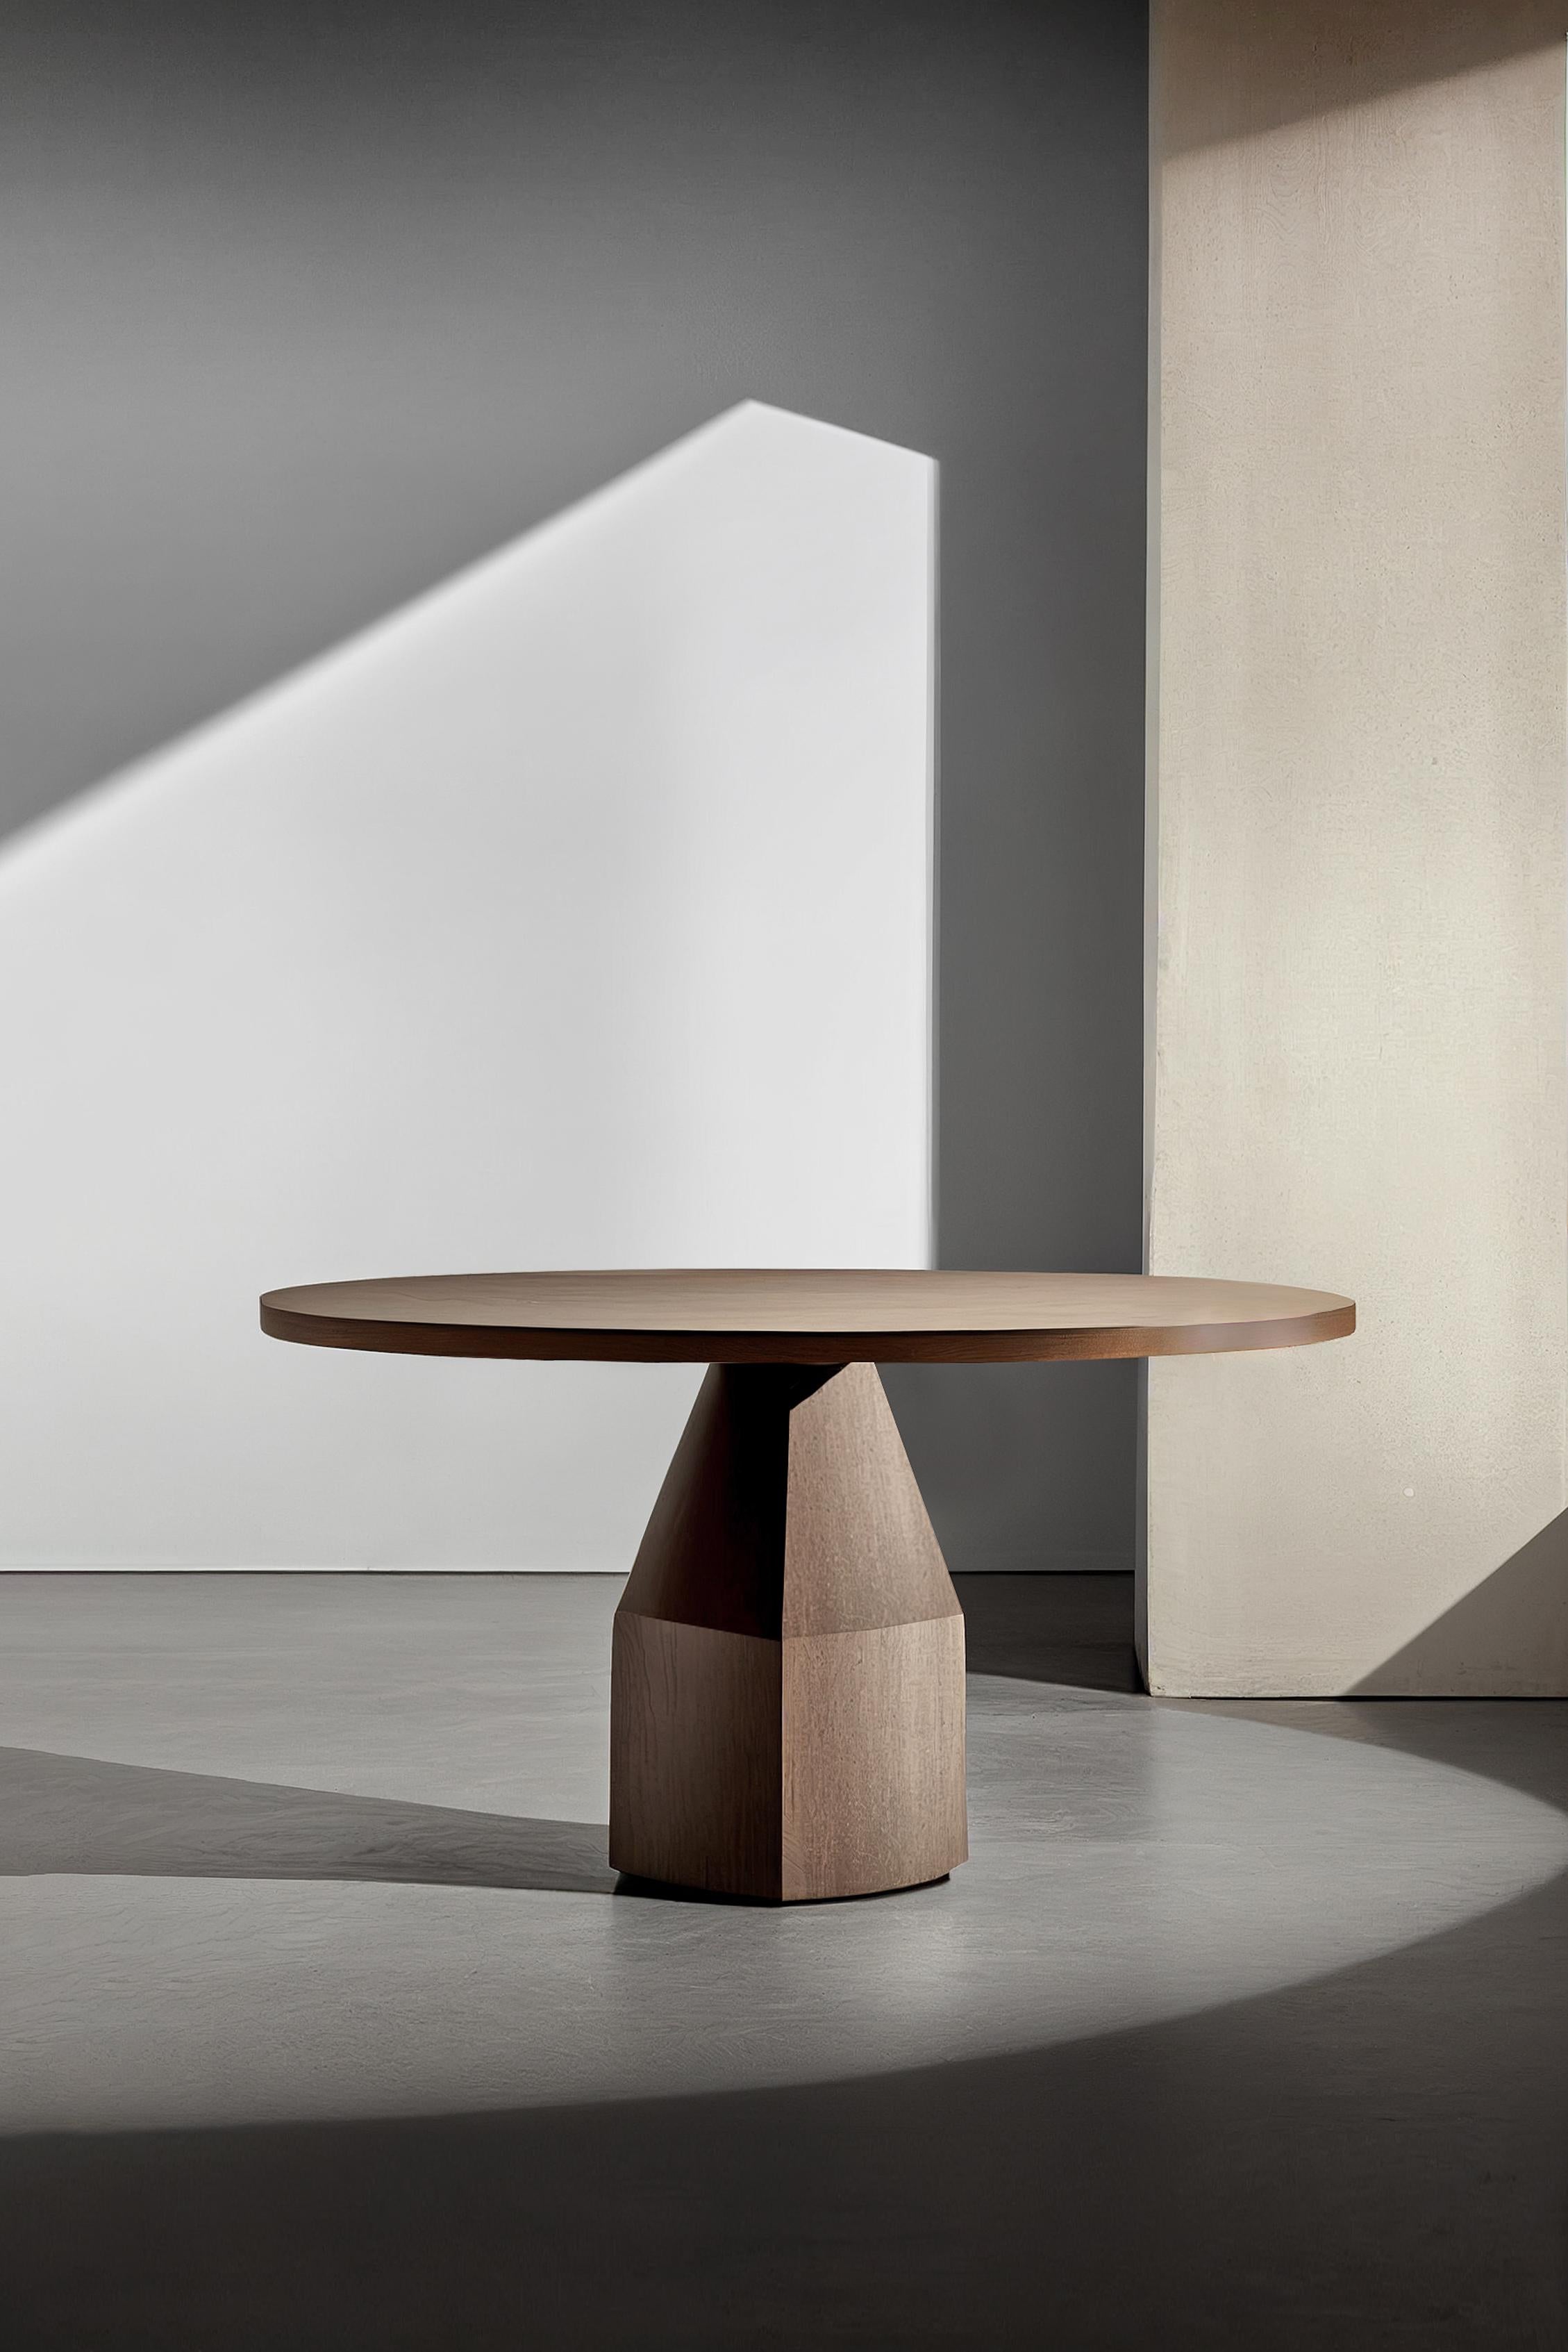 Moka dining table, round table for four by NONO.

The Moka dining table is a sculptural dining table collection inspired by the iconic Italian moka pot. Crafted from solid wood, its contemporary shapes is a design of the NONO Design Team. With a